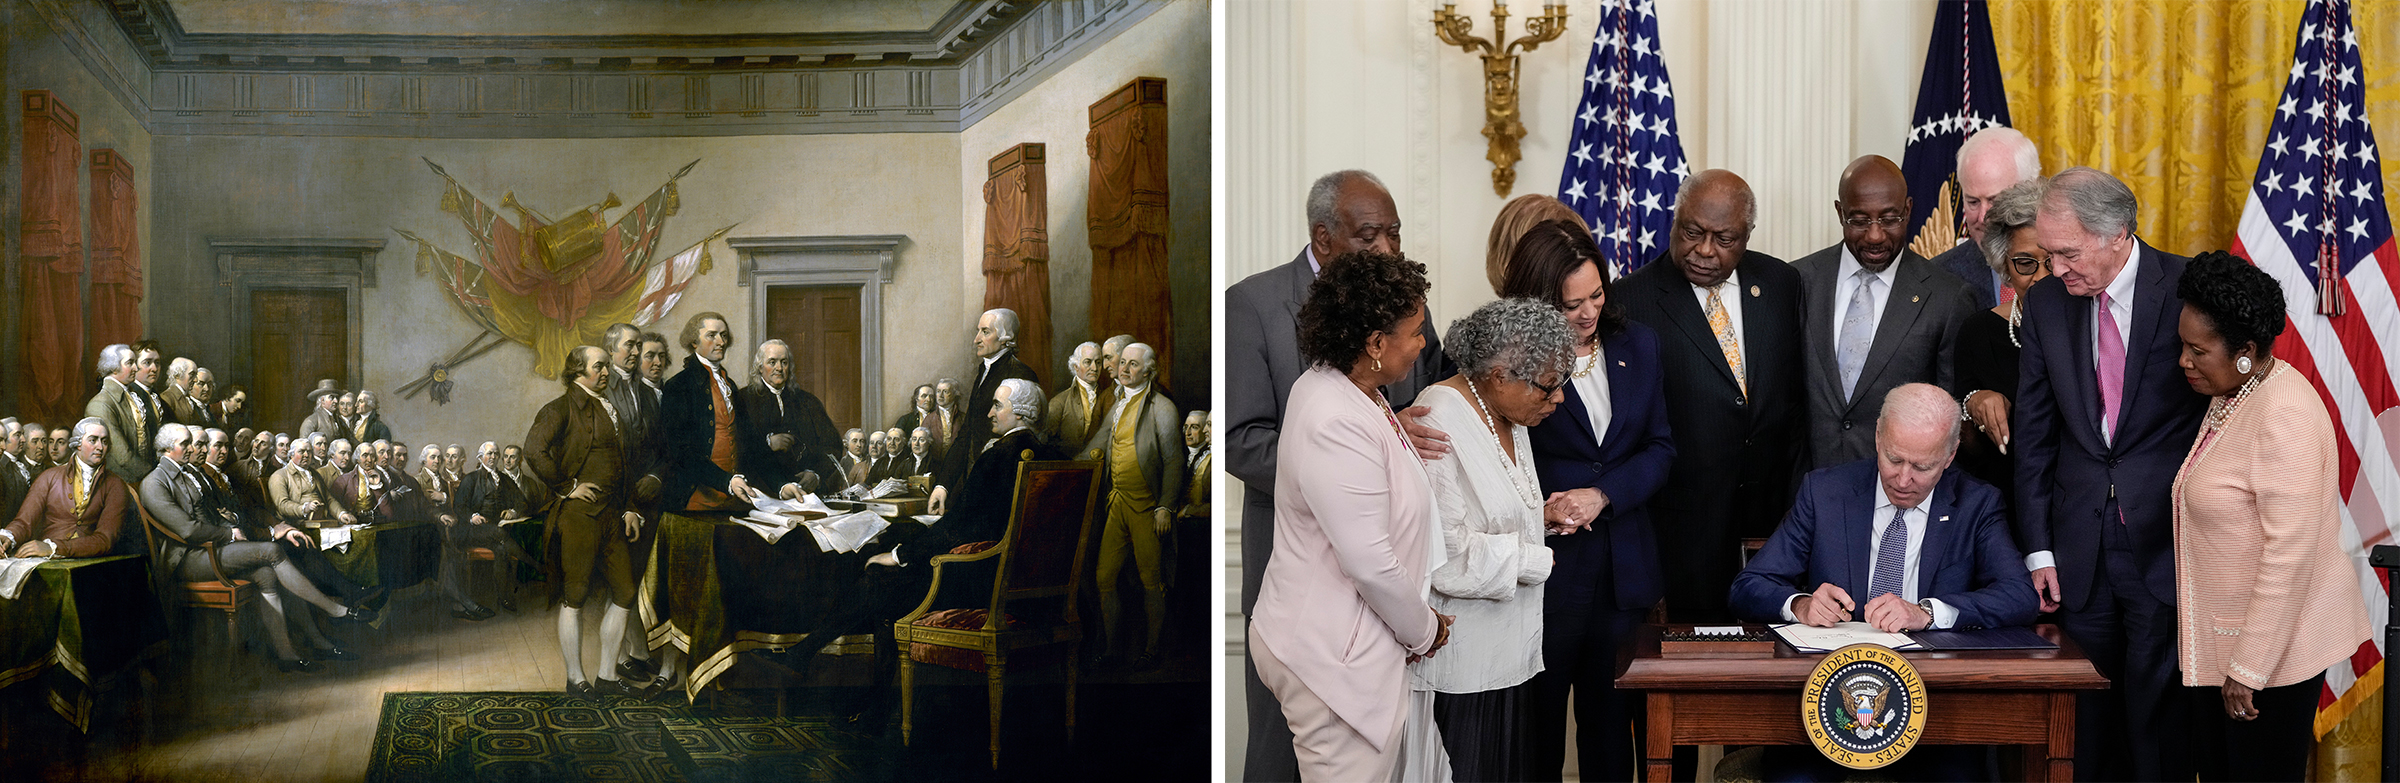 Left: John Trumbull's painting, "Declaration of Independence," depicting the five-man drafting committee of the Declaration of Independence presenting their work to the Congress. Right: U.S. President Joe Biden signs the Juneteenth National Independence Day Act into law in the East Room of the White House on June 17, 2021. (Universal History Archive/Getty Images; Drew Angerer—Getty Images)